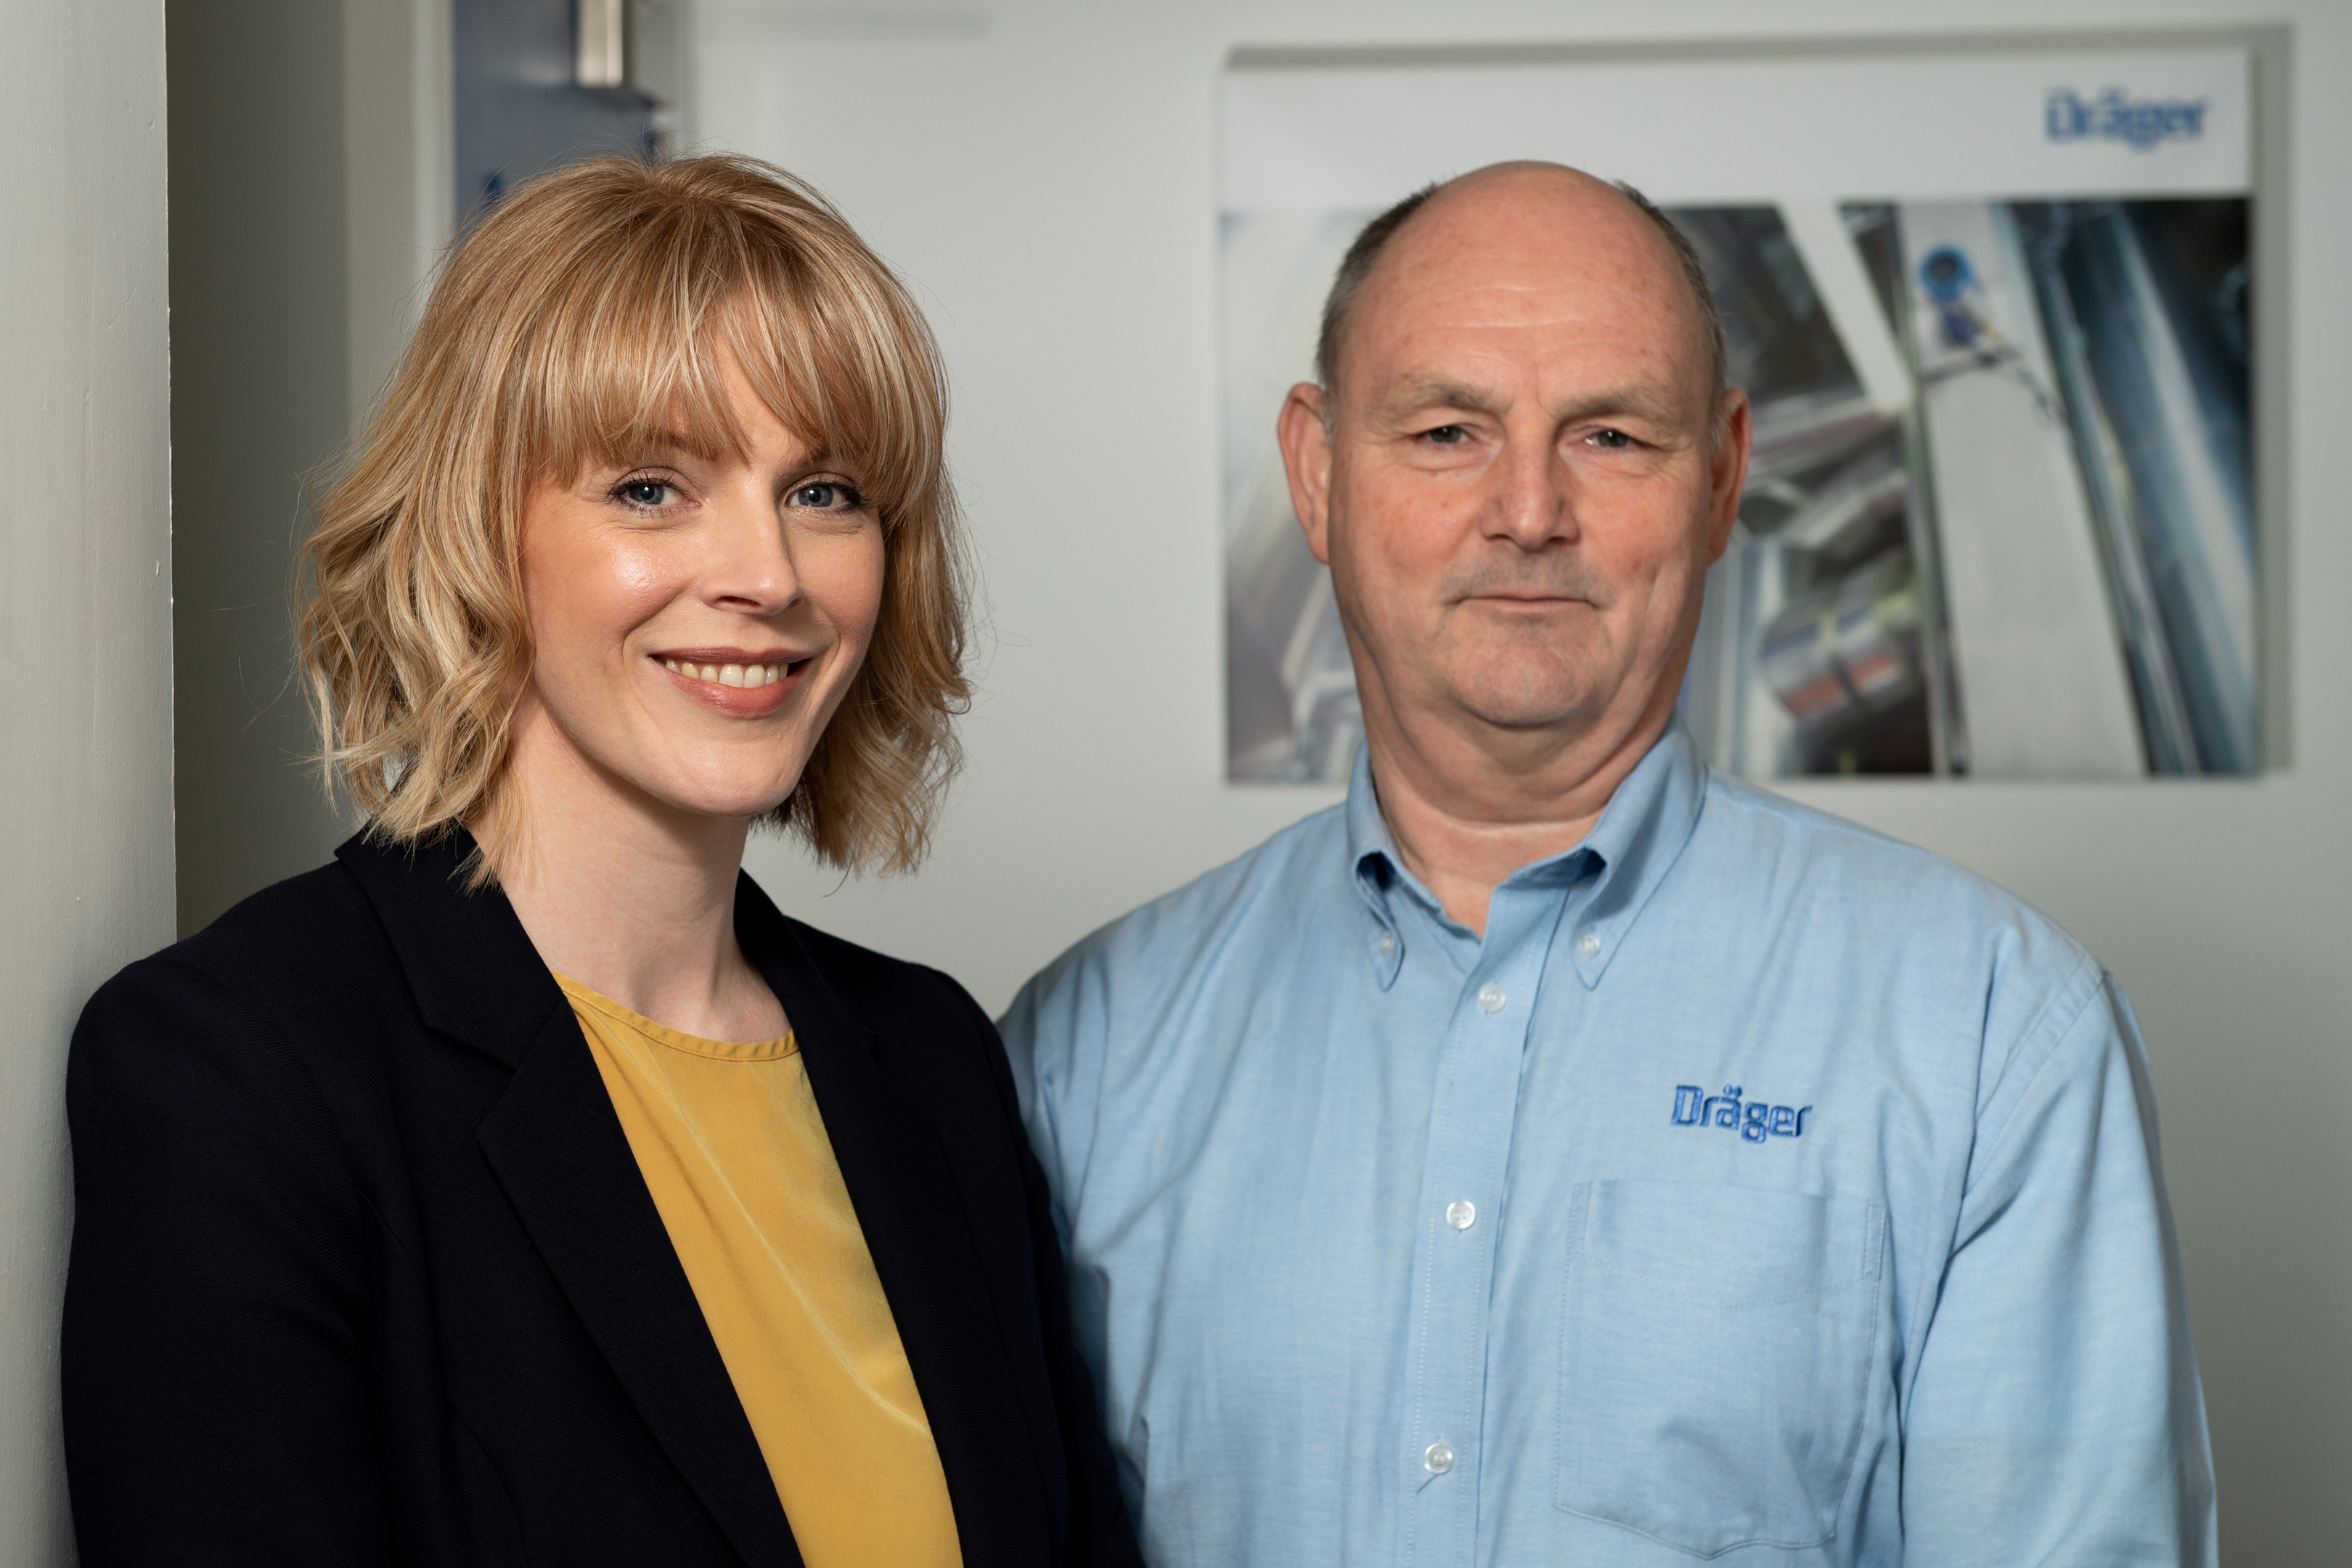 Dräger UK Managing Director Mike Norris (right) welcomes Kelly Murray at the company’s Aberdeen base